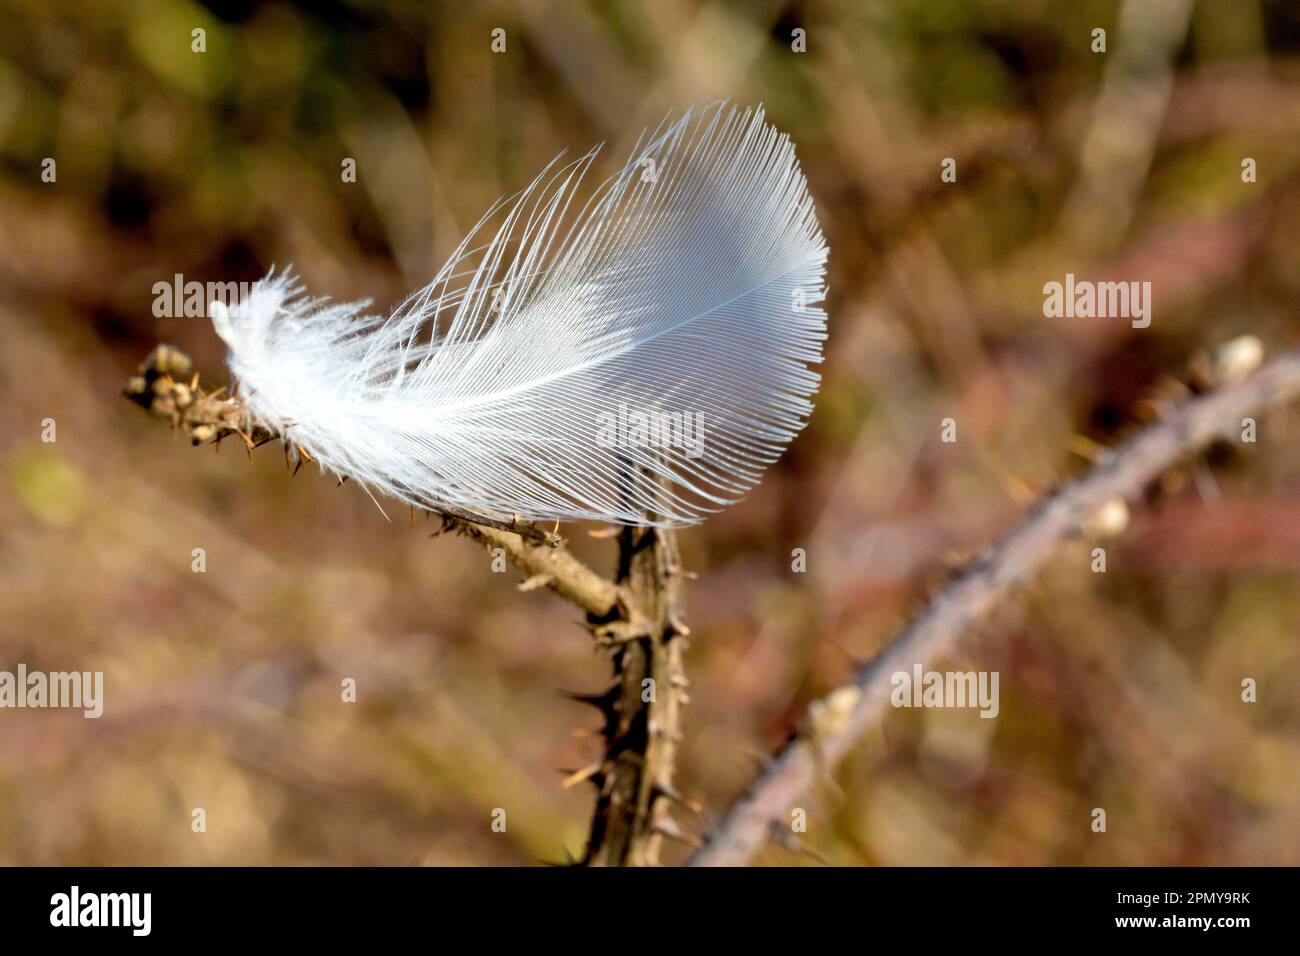 Close up of a small white feather caught on the prickles or thorns of a Bramble or Blackberry stem, backlit in the early spring sunshine. Stock Photo